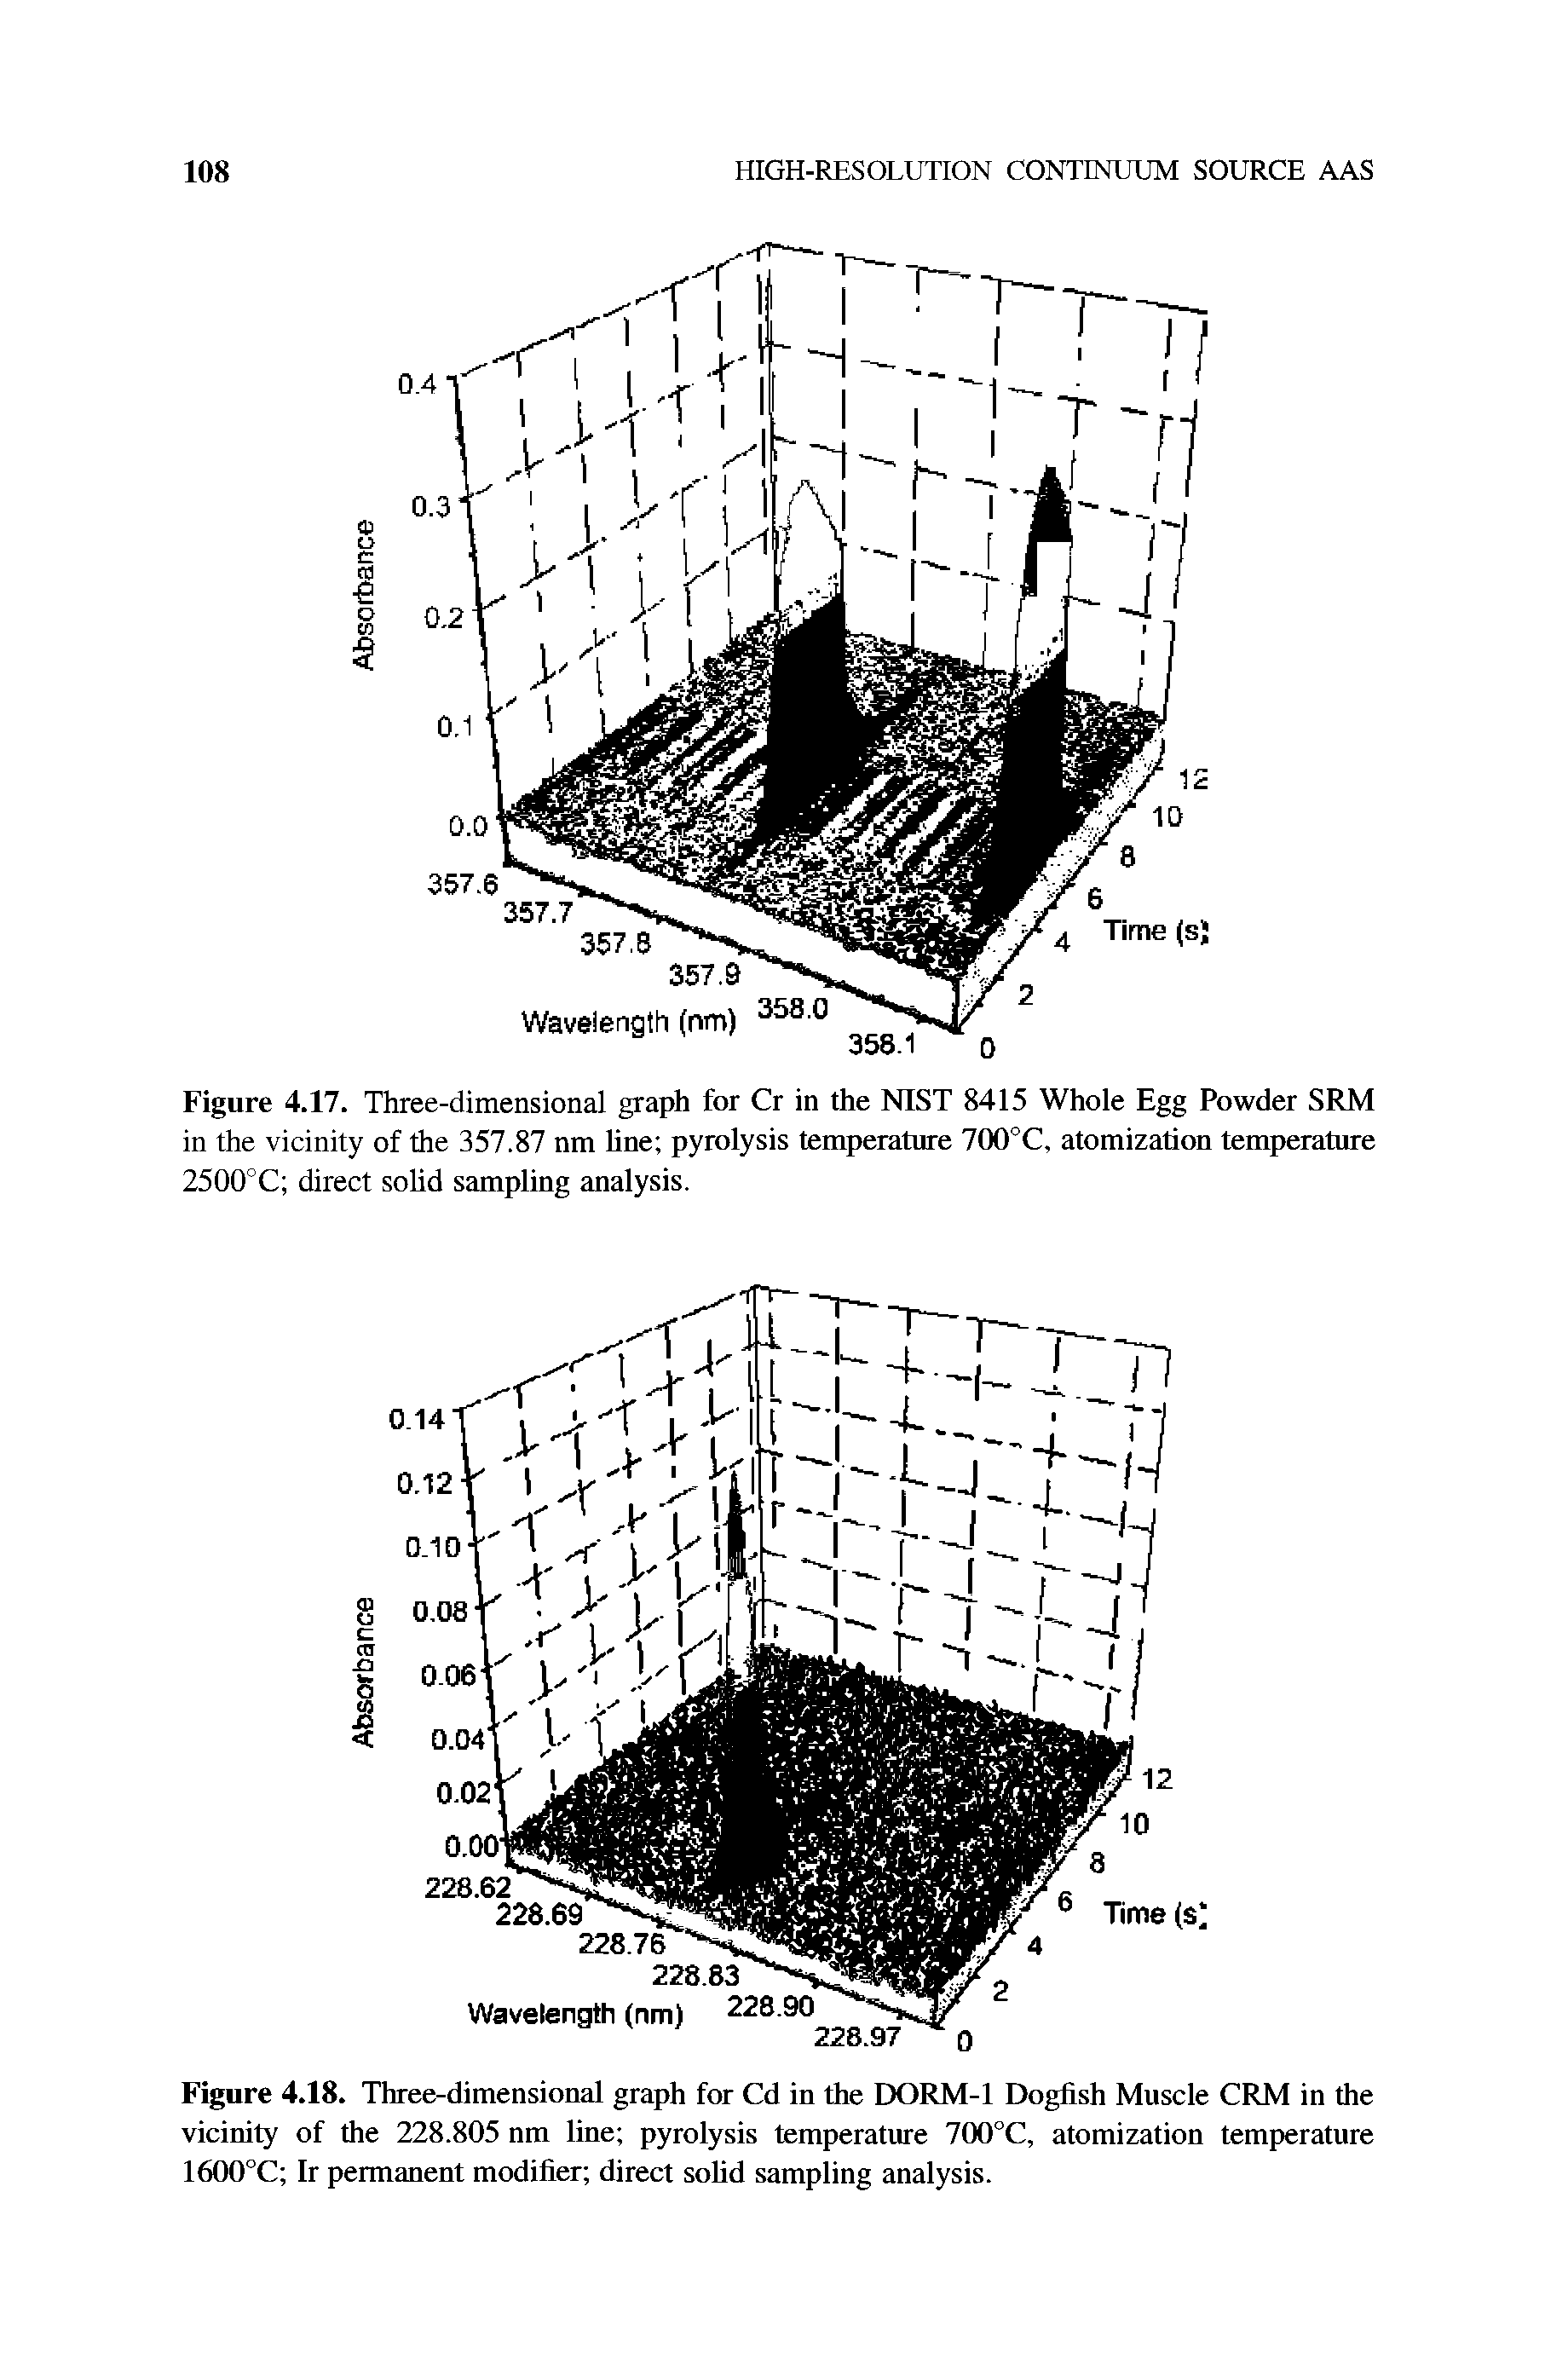 Figure 4.17. Three-dimensional graph for Cr in the NIST 8415 Whole Egg Powder SRM in the vicinity of the 357.87 nm line pyrolysis temperature 700°C, atomization temperature 2500°C direct solid sampling analysis.